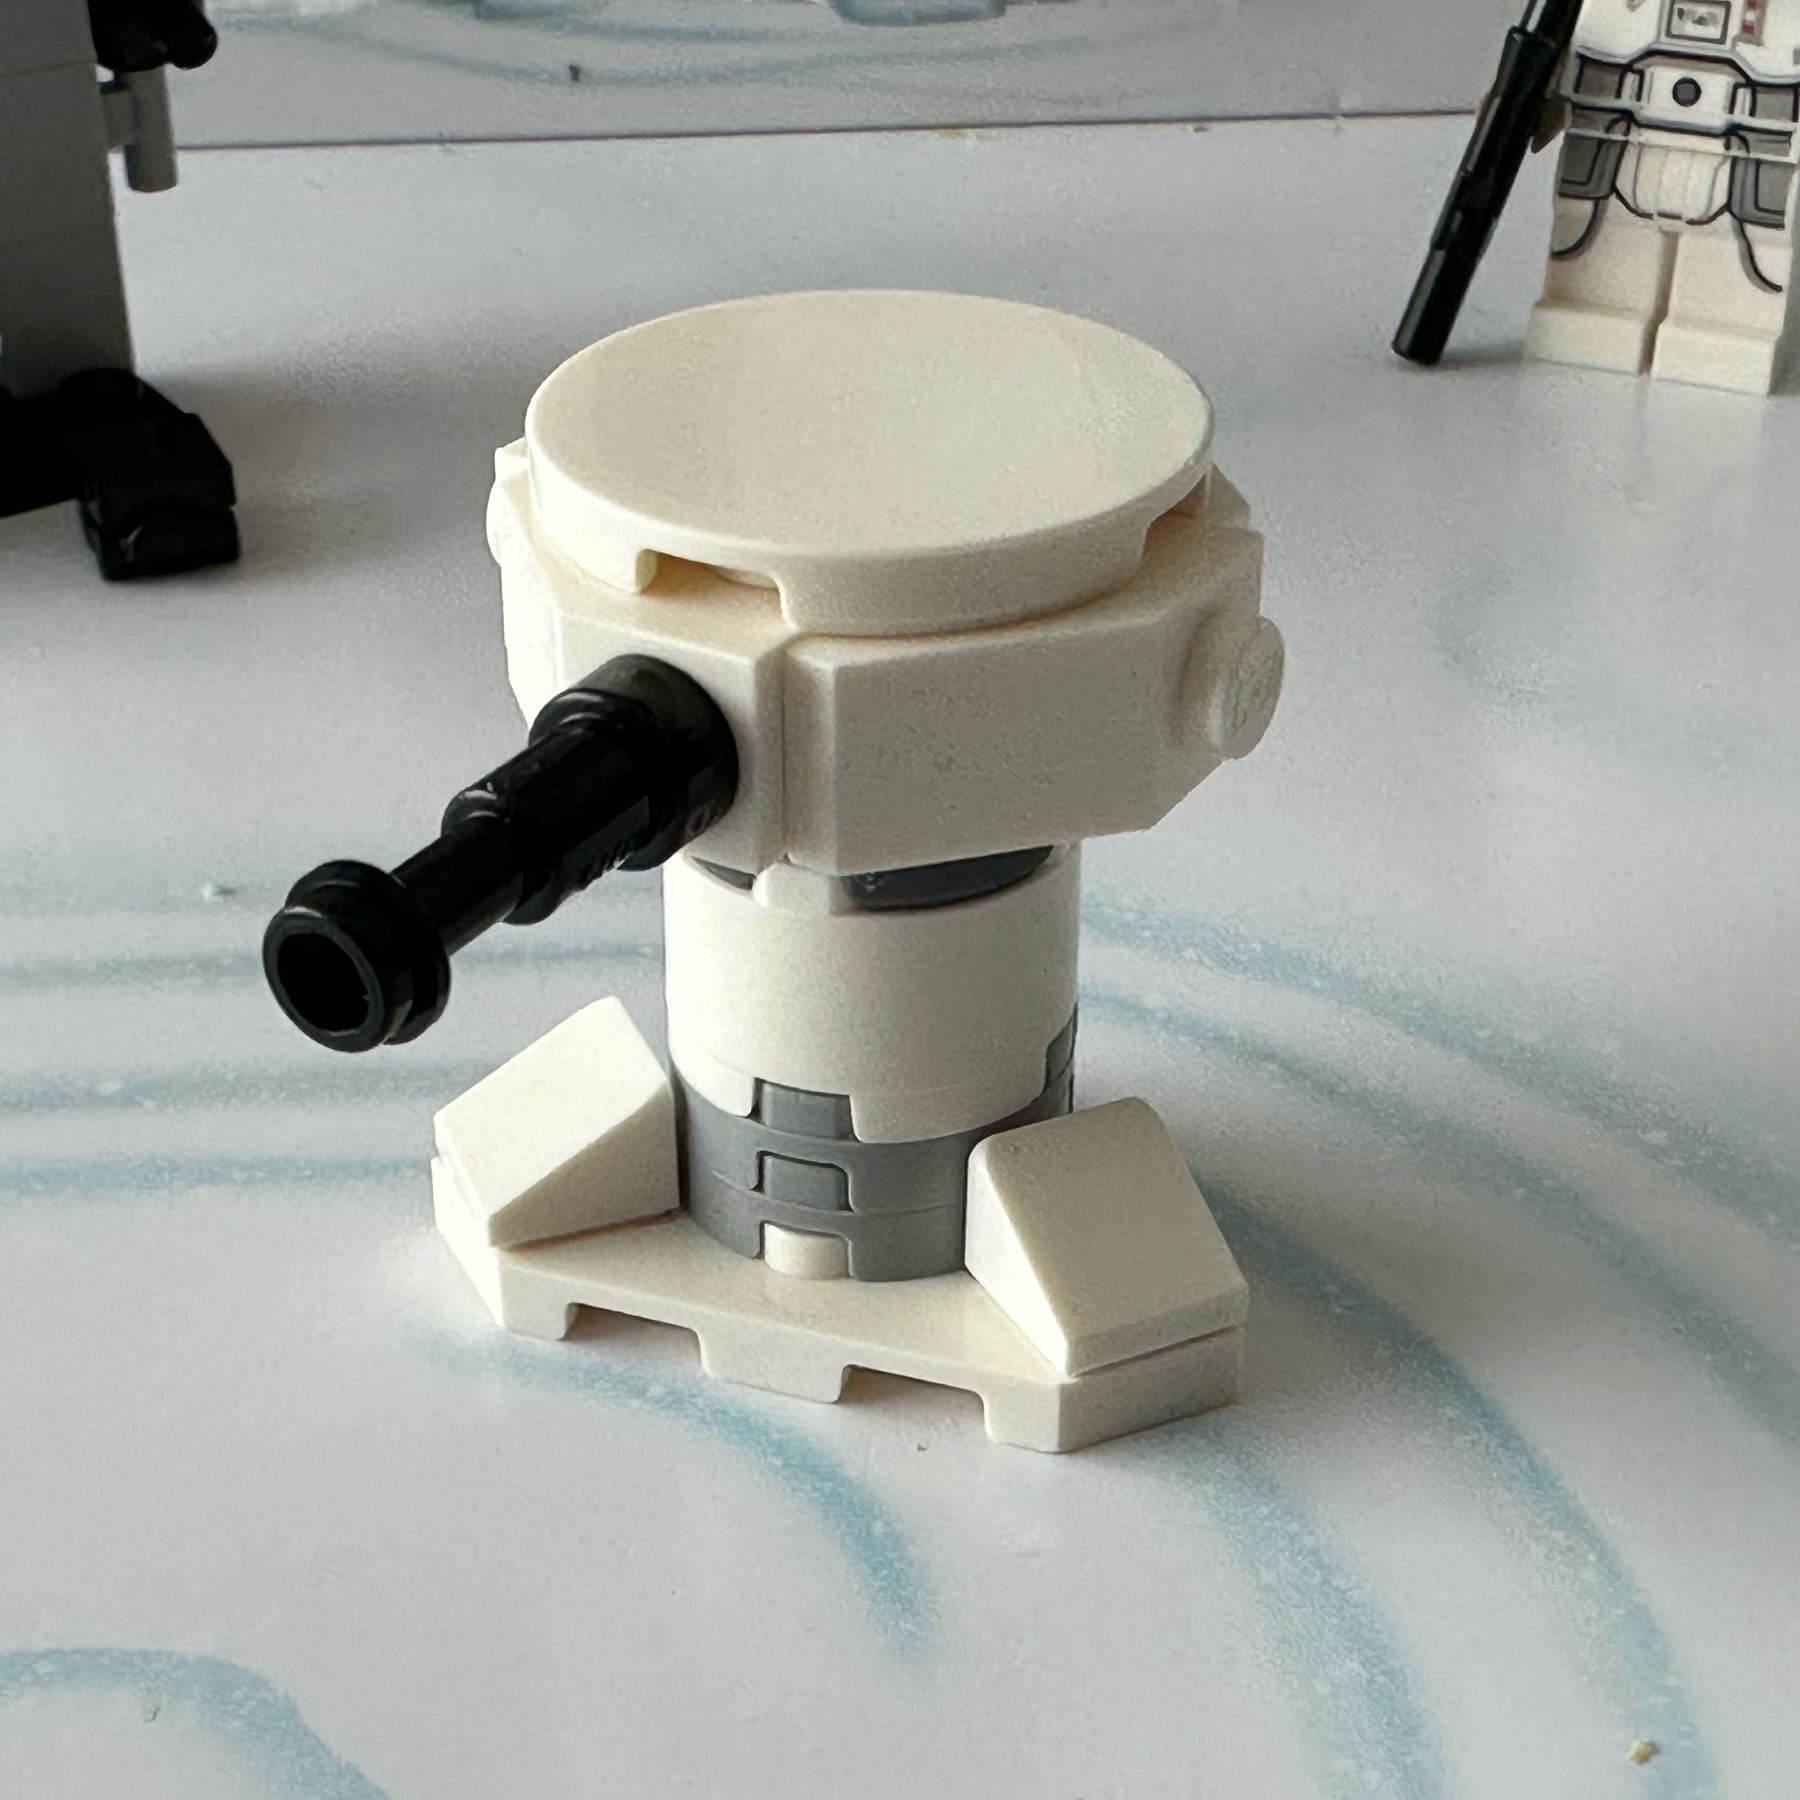 LEGO build of a DF 9 turret gun from Star Wars